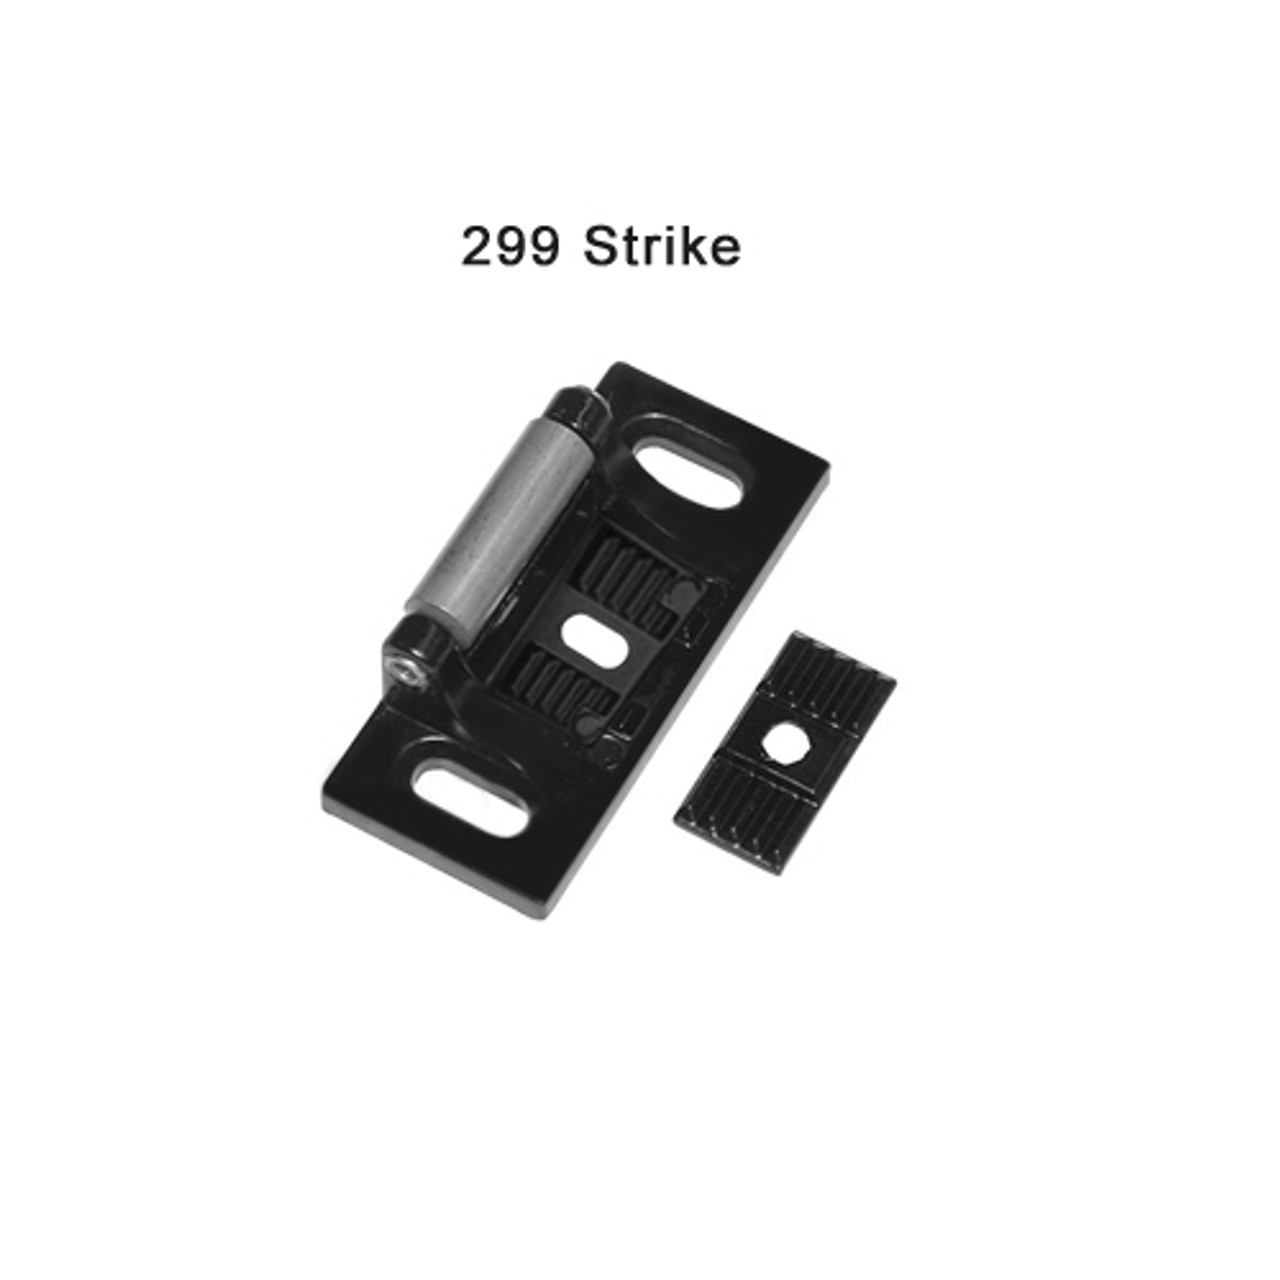 CD24-R-L-BE-DANE-US19-4-LHR Falcon 24 Series Rim Exit Device 712L-BE Dane Lever Trim with Blank Escutcheon in Flat Black Painted